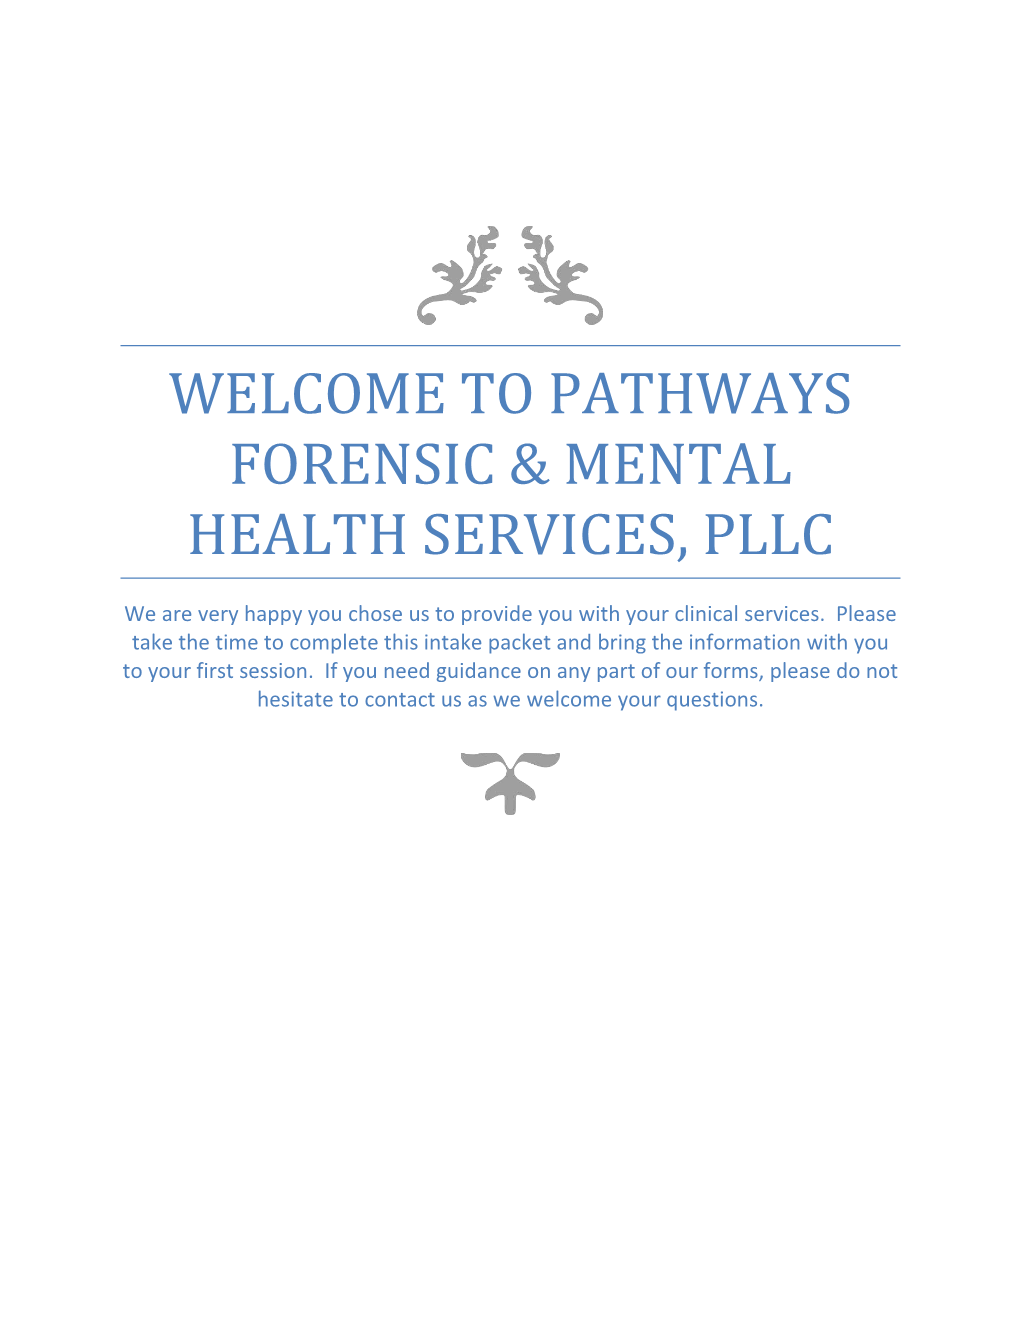 Welcome to Pathways Forensic & Mental Health Services, PLLC